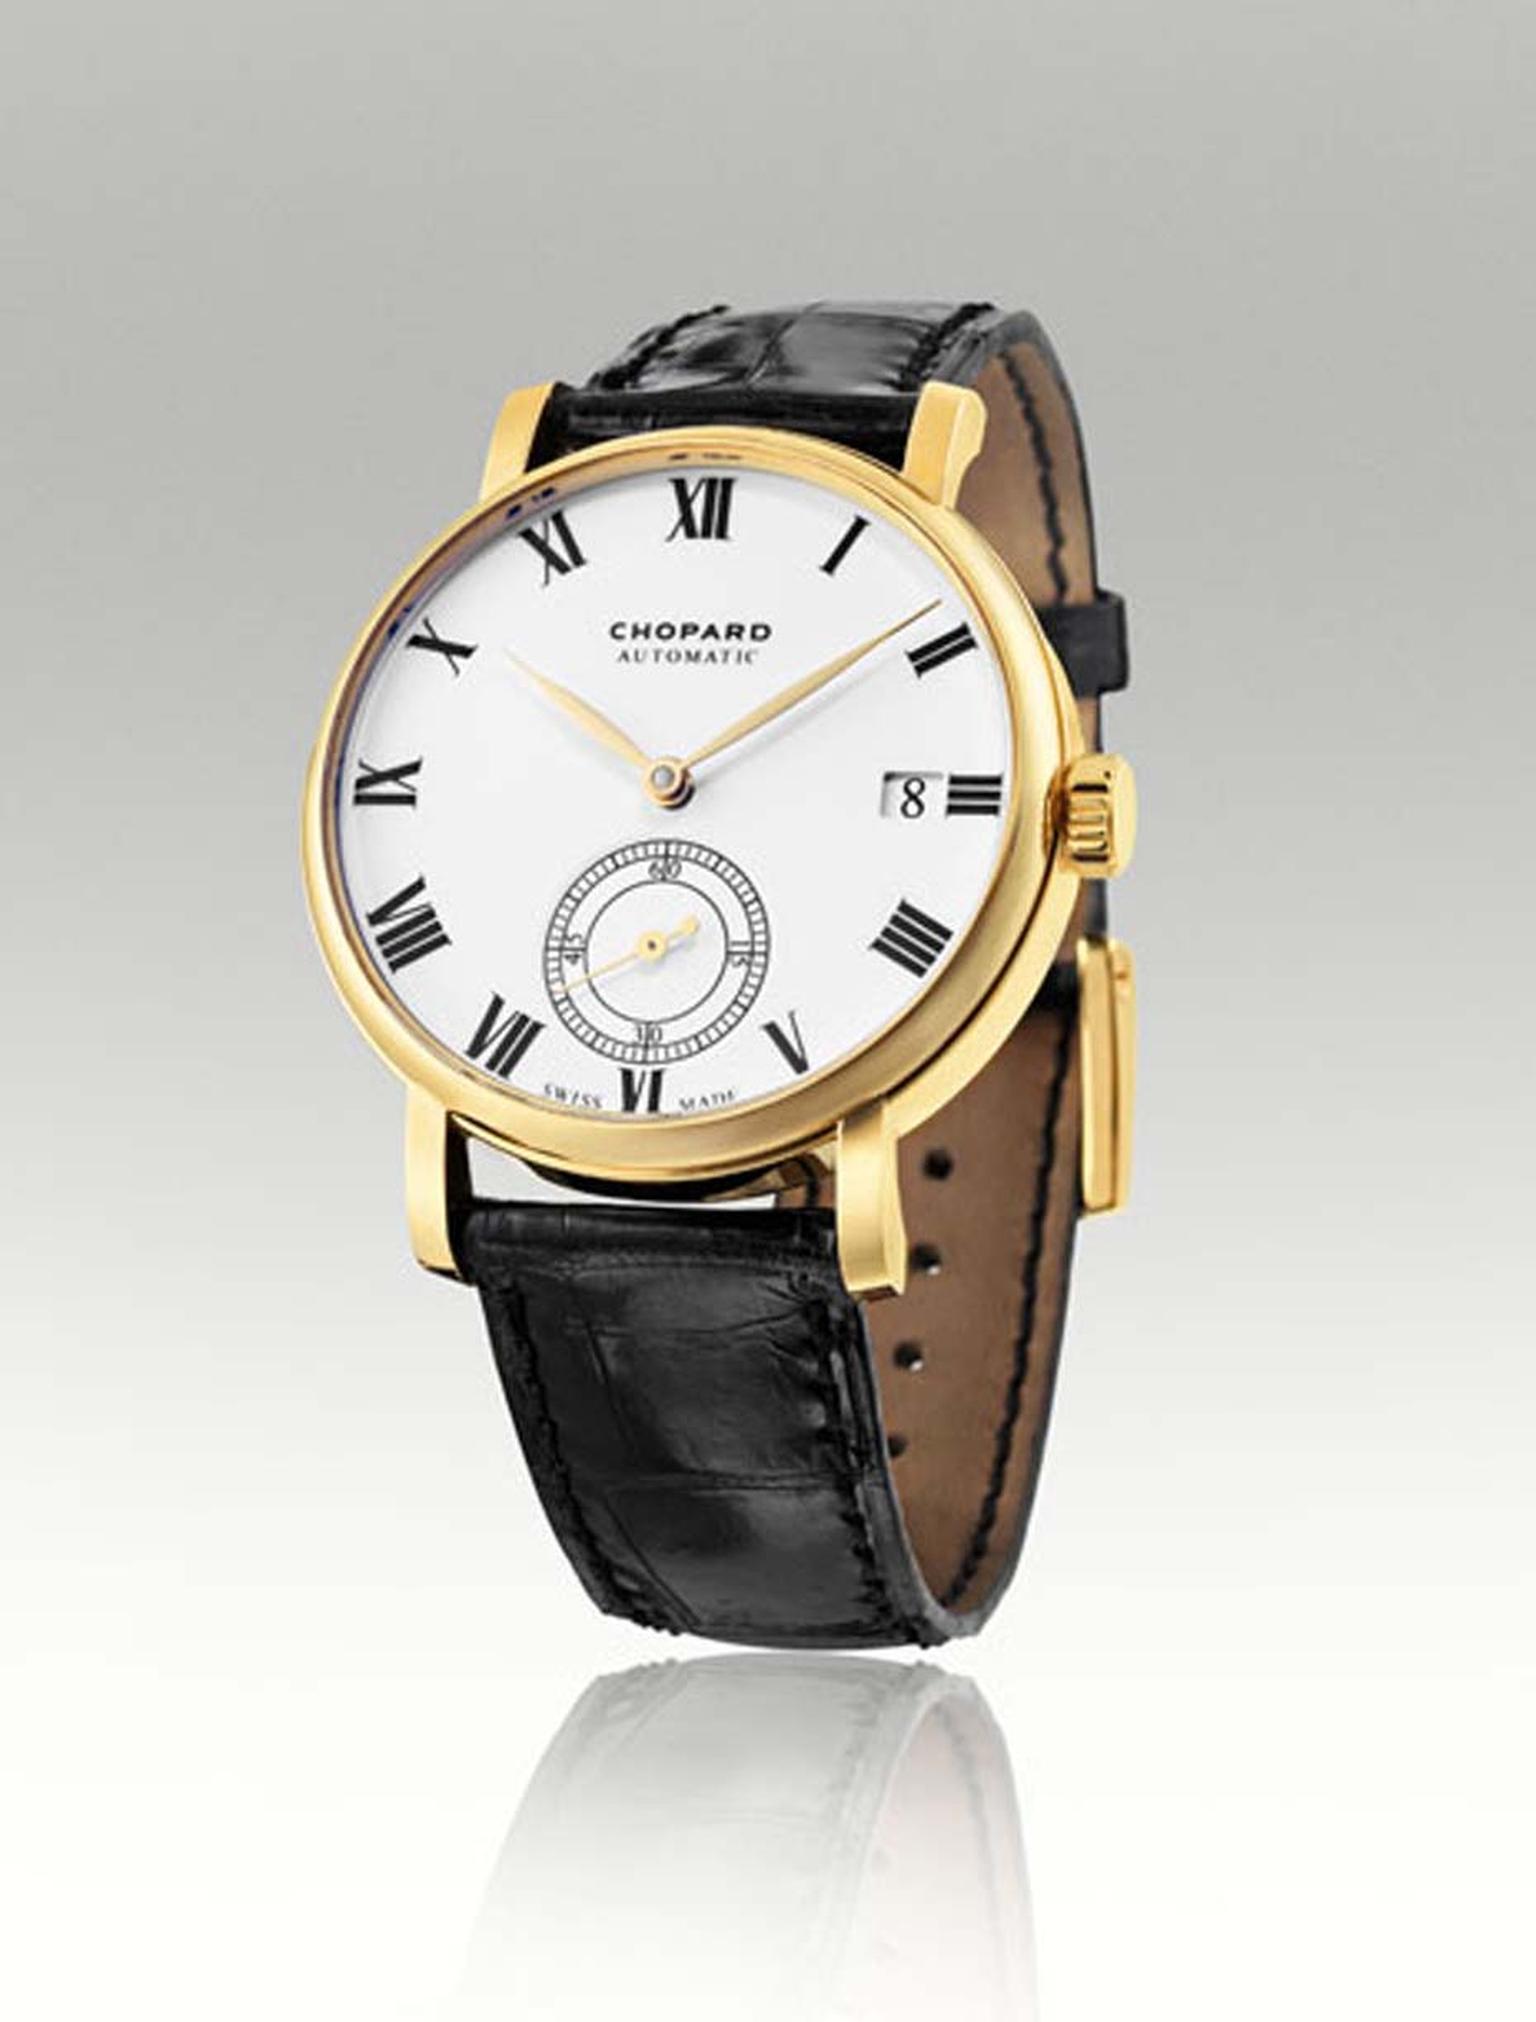 Chopard Classic Manufacture men's watch in yellow gold with a 38mm case and a small seconds subdial at 6 o'clock.